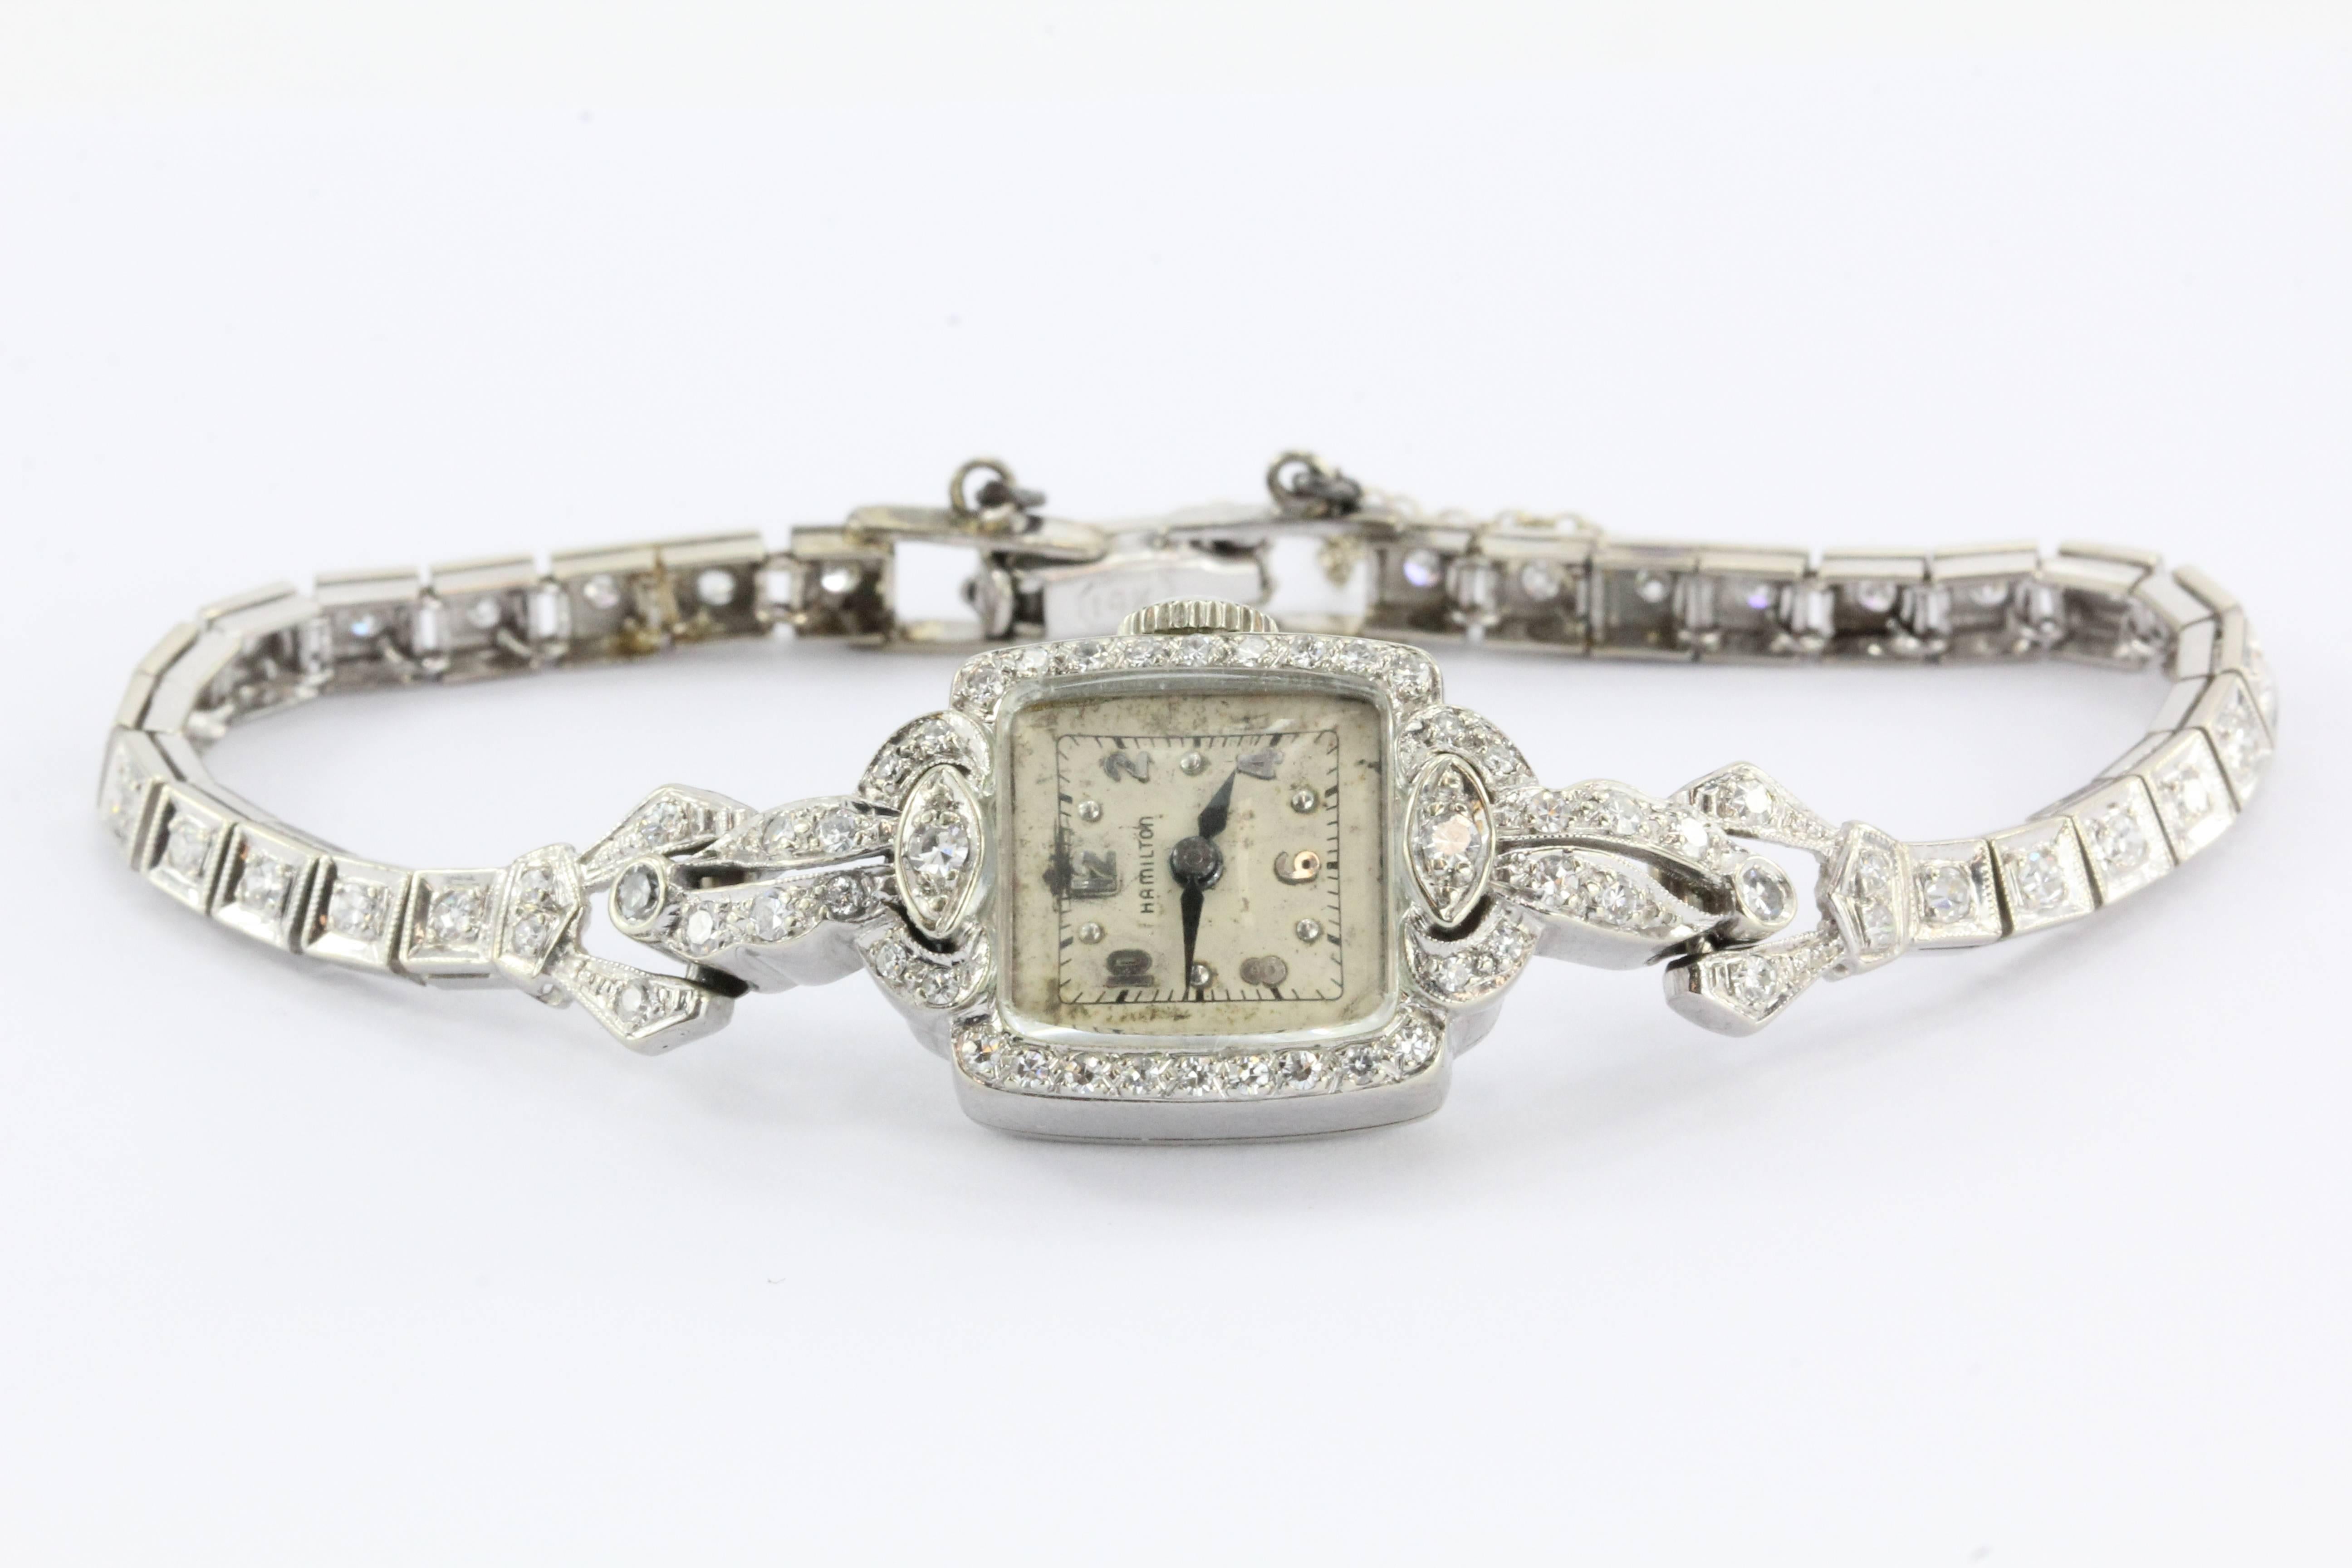 Antique 14K White Gold & Diamond 17 Jewel Hamilton Luxury Watch. The watch case and band are in excellent estate condition but the actual watch is not running. The dial will also need to be replaced. The entire piece is set with 76 single cut